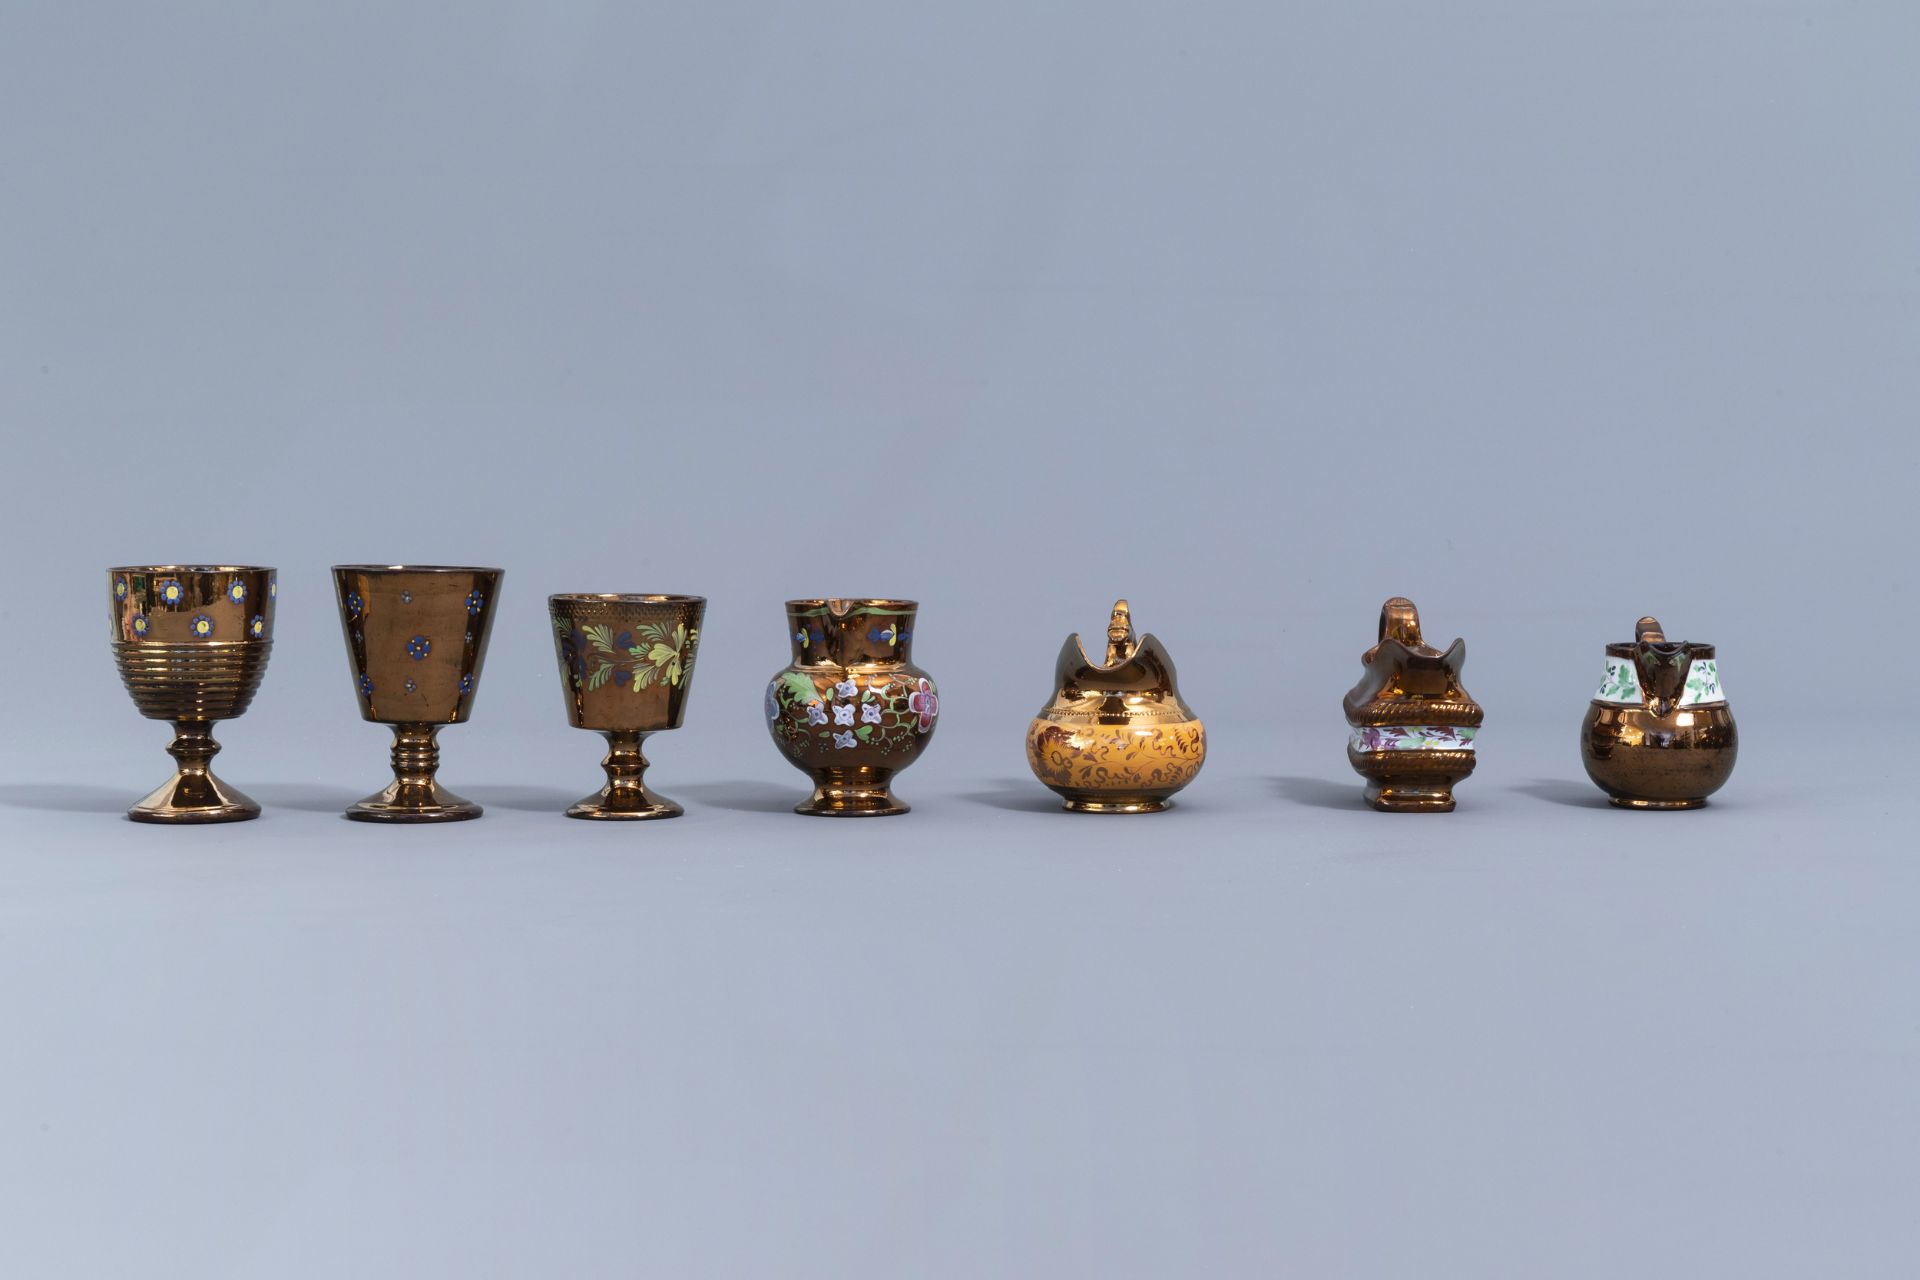 A varied collection of English lustreware items with polychrome floral design, 19th C. - Image 9 of 50